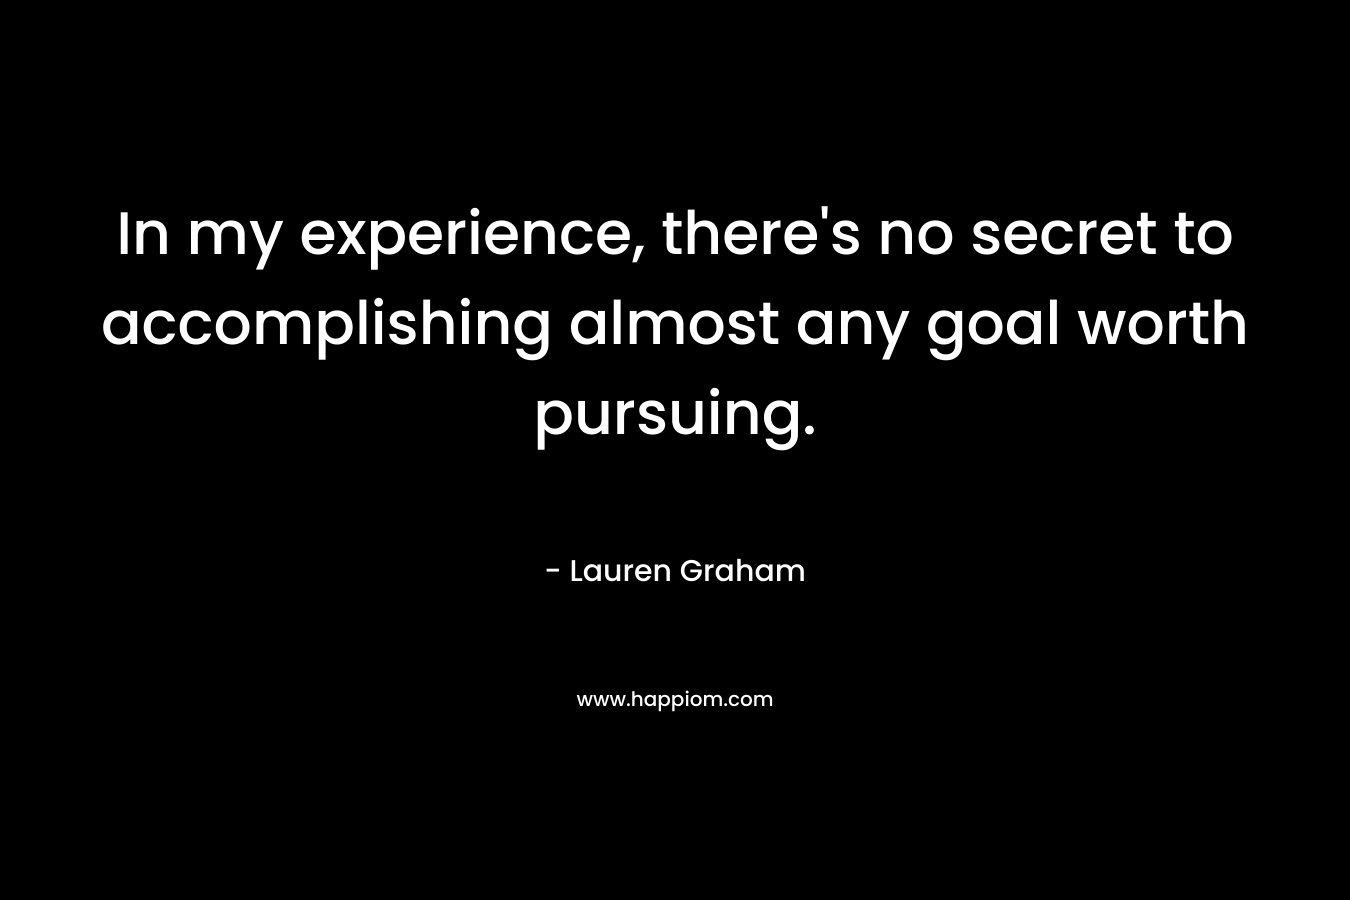 In my experience, there's no secret to accomplishing almost any goal worth pursuing.